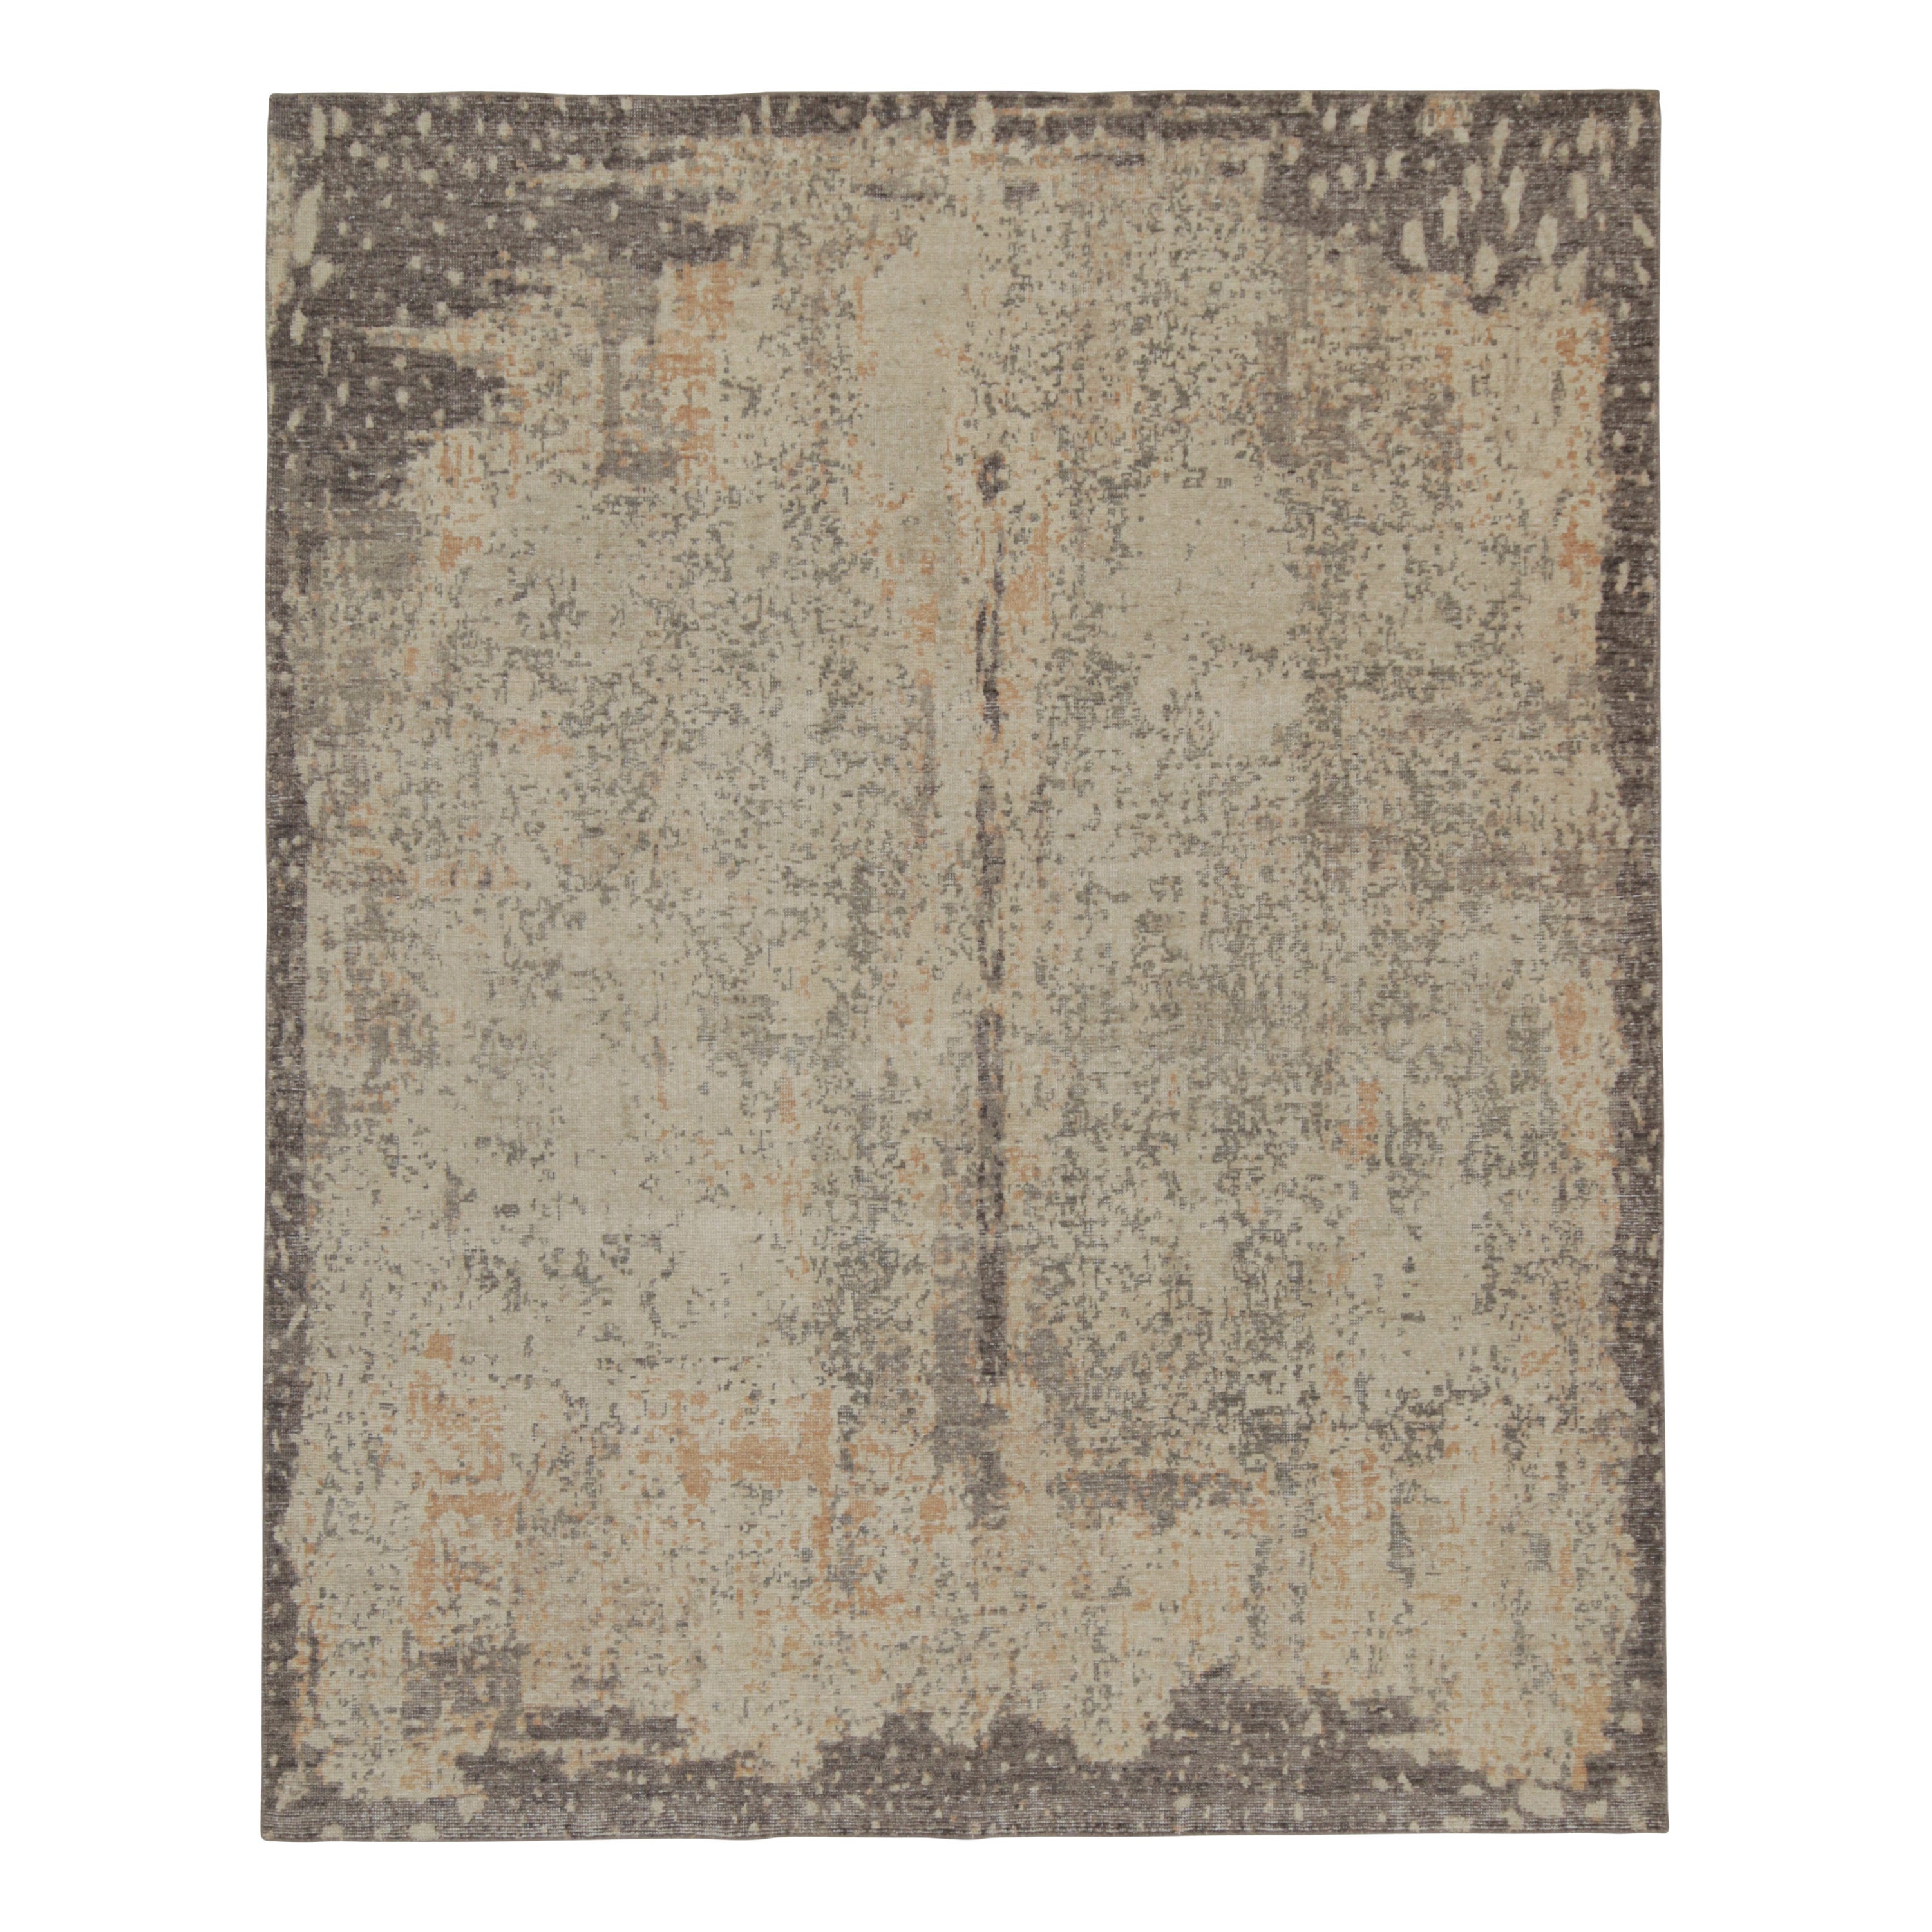 Rug & Kilim’s Distressed Style Abstract Rug in Beige and Gray All Over Pattern